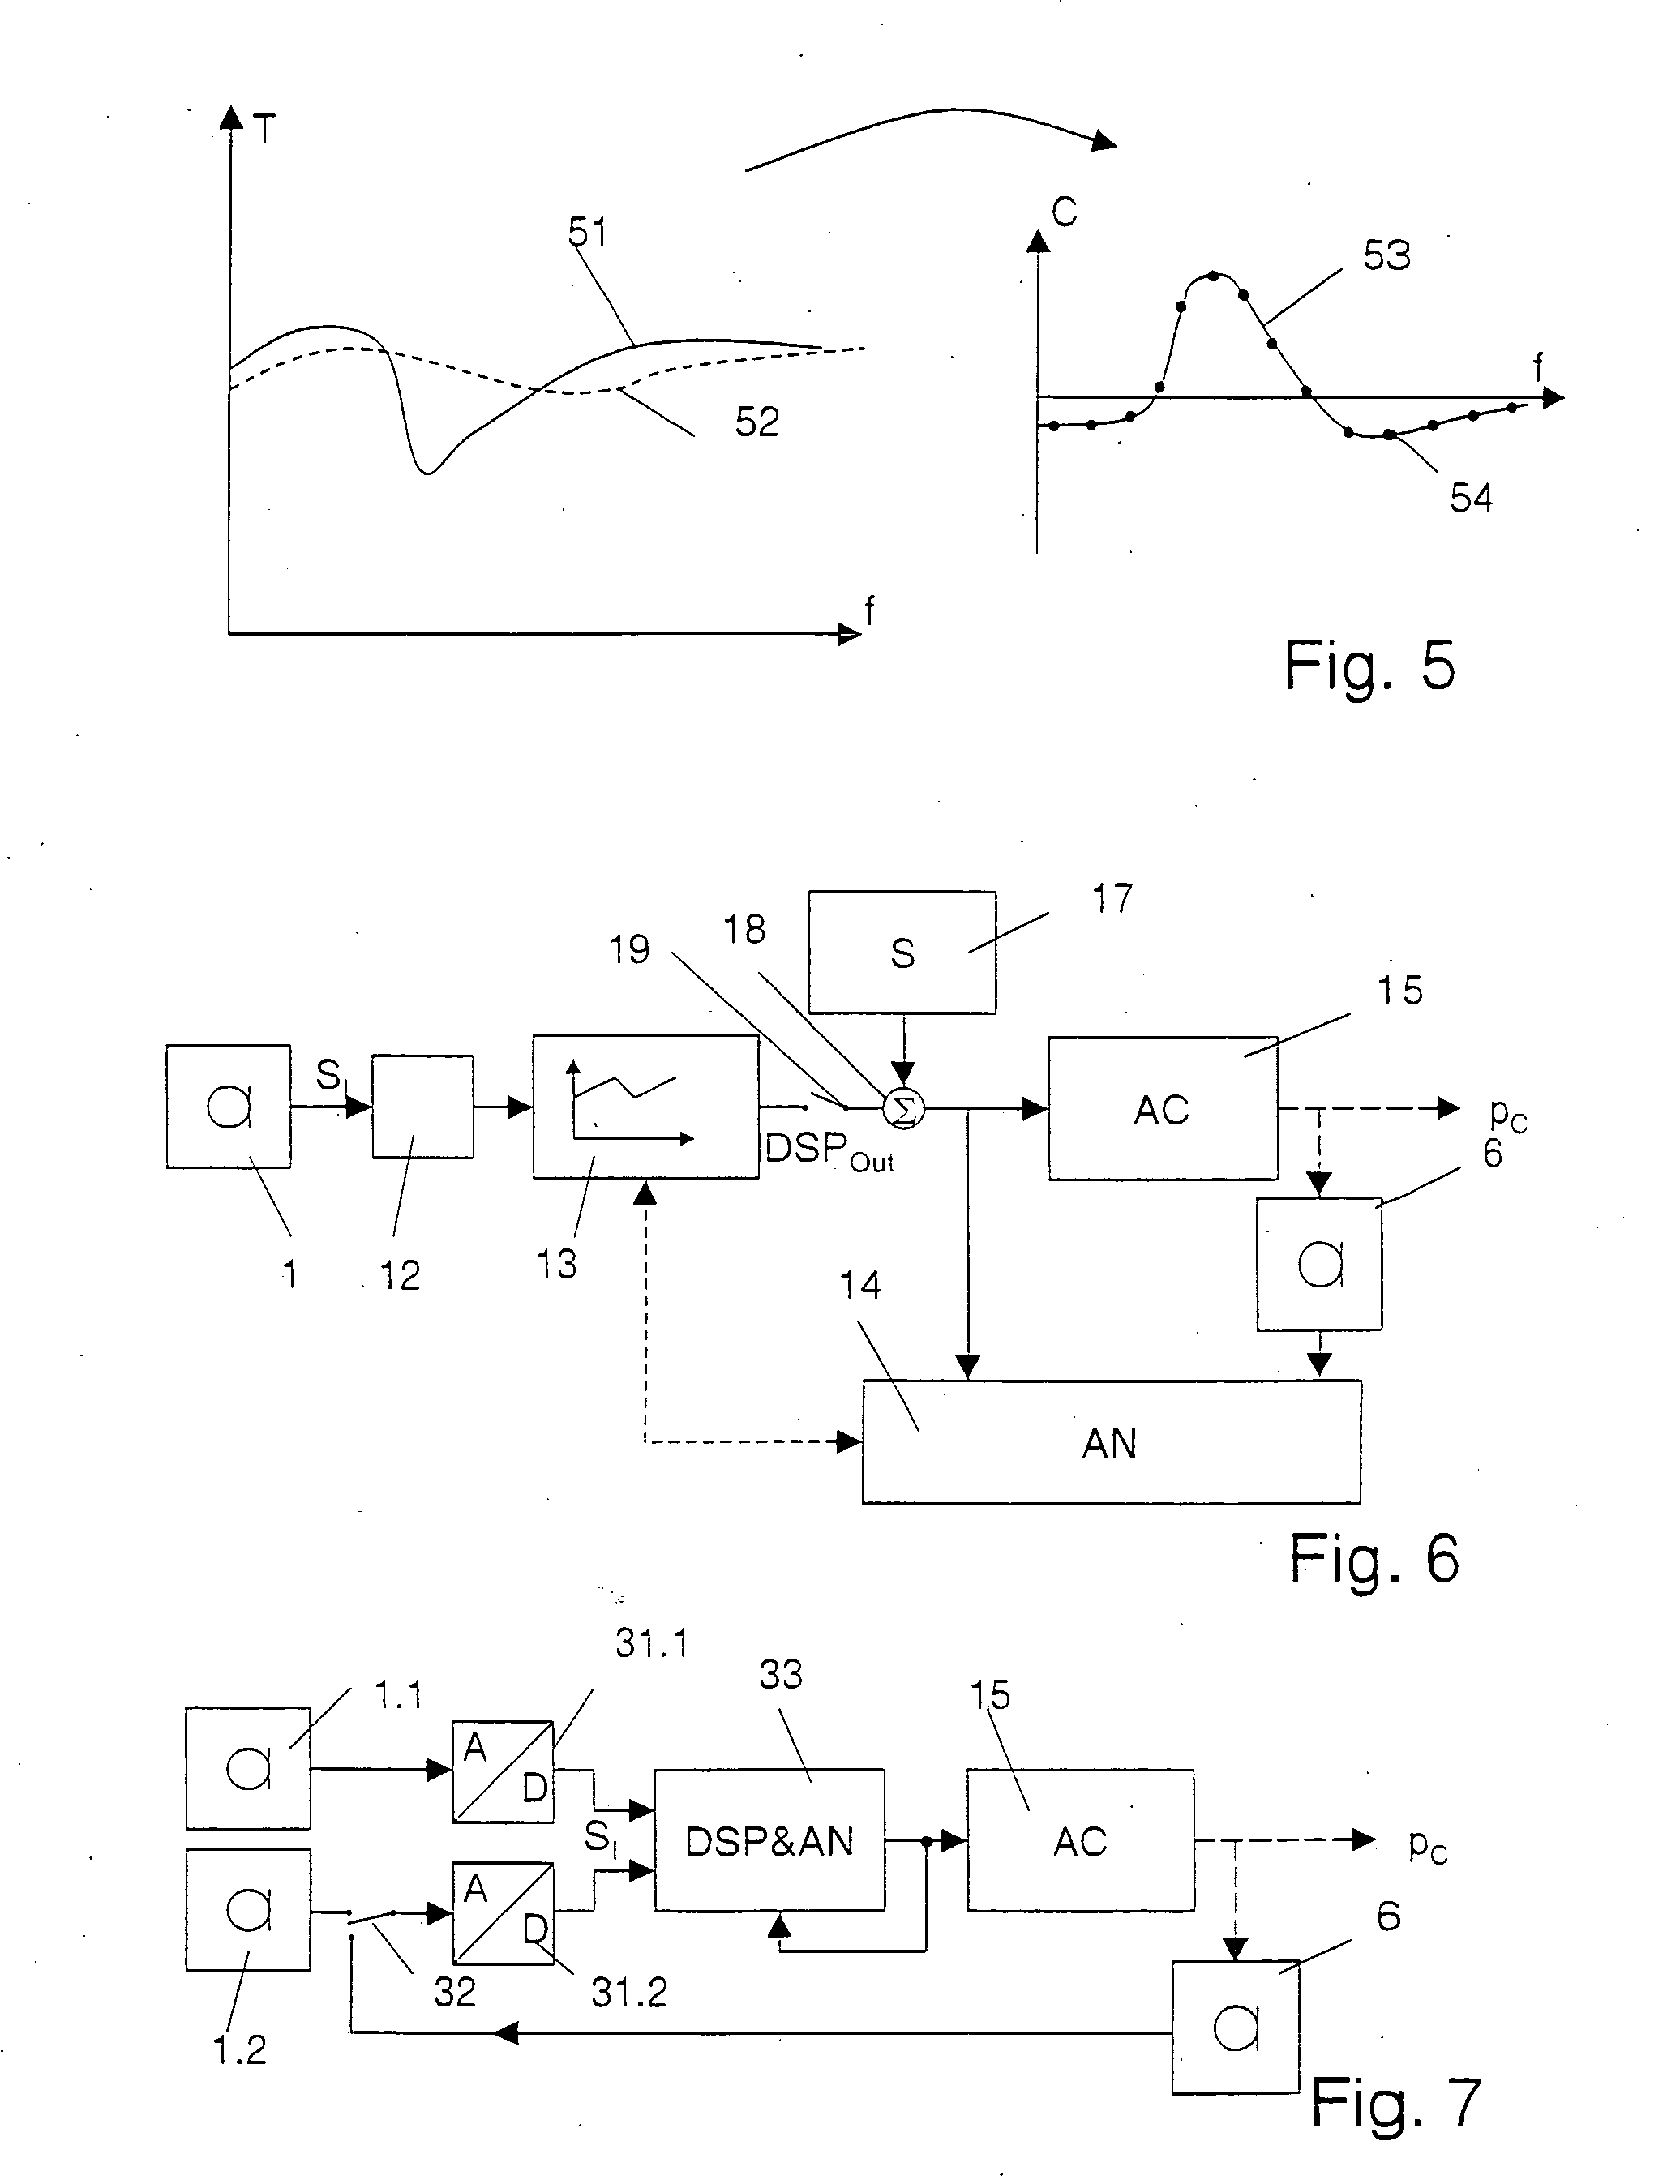 Method of obtaining a characteristic, and hearing instrument